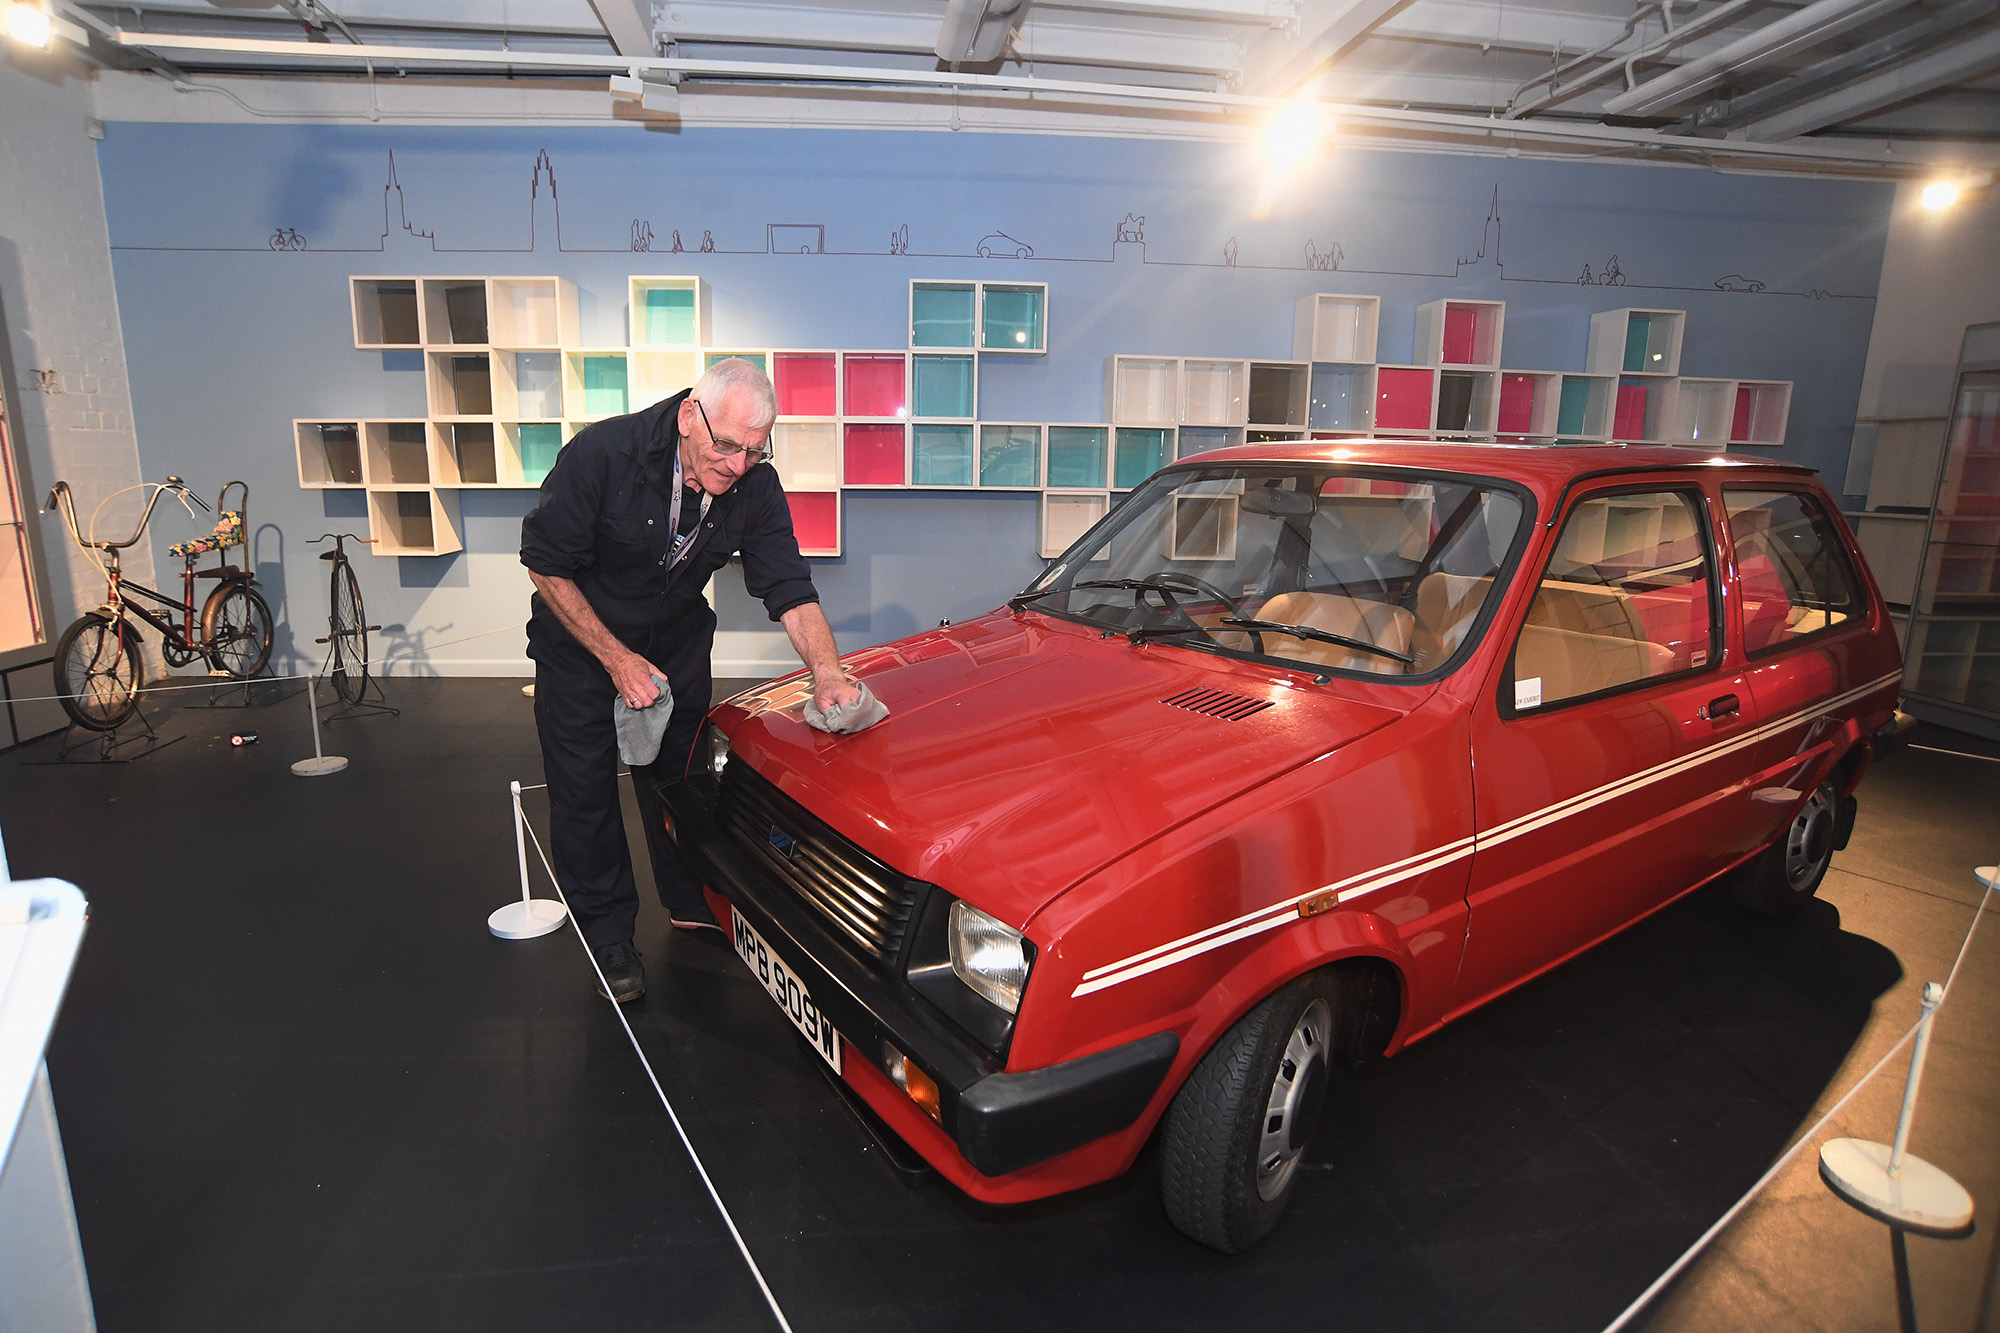 A member of the Coventry Transport Museum workshop team dressed in overalls, polishing Princess Diana's red Austin Mini Metro L on display in the museum